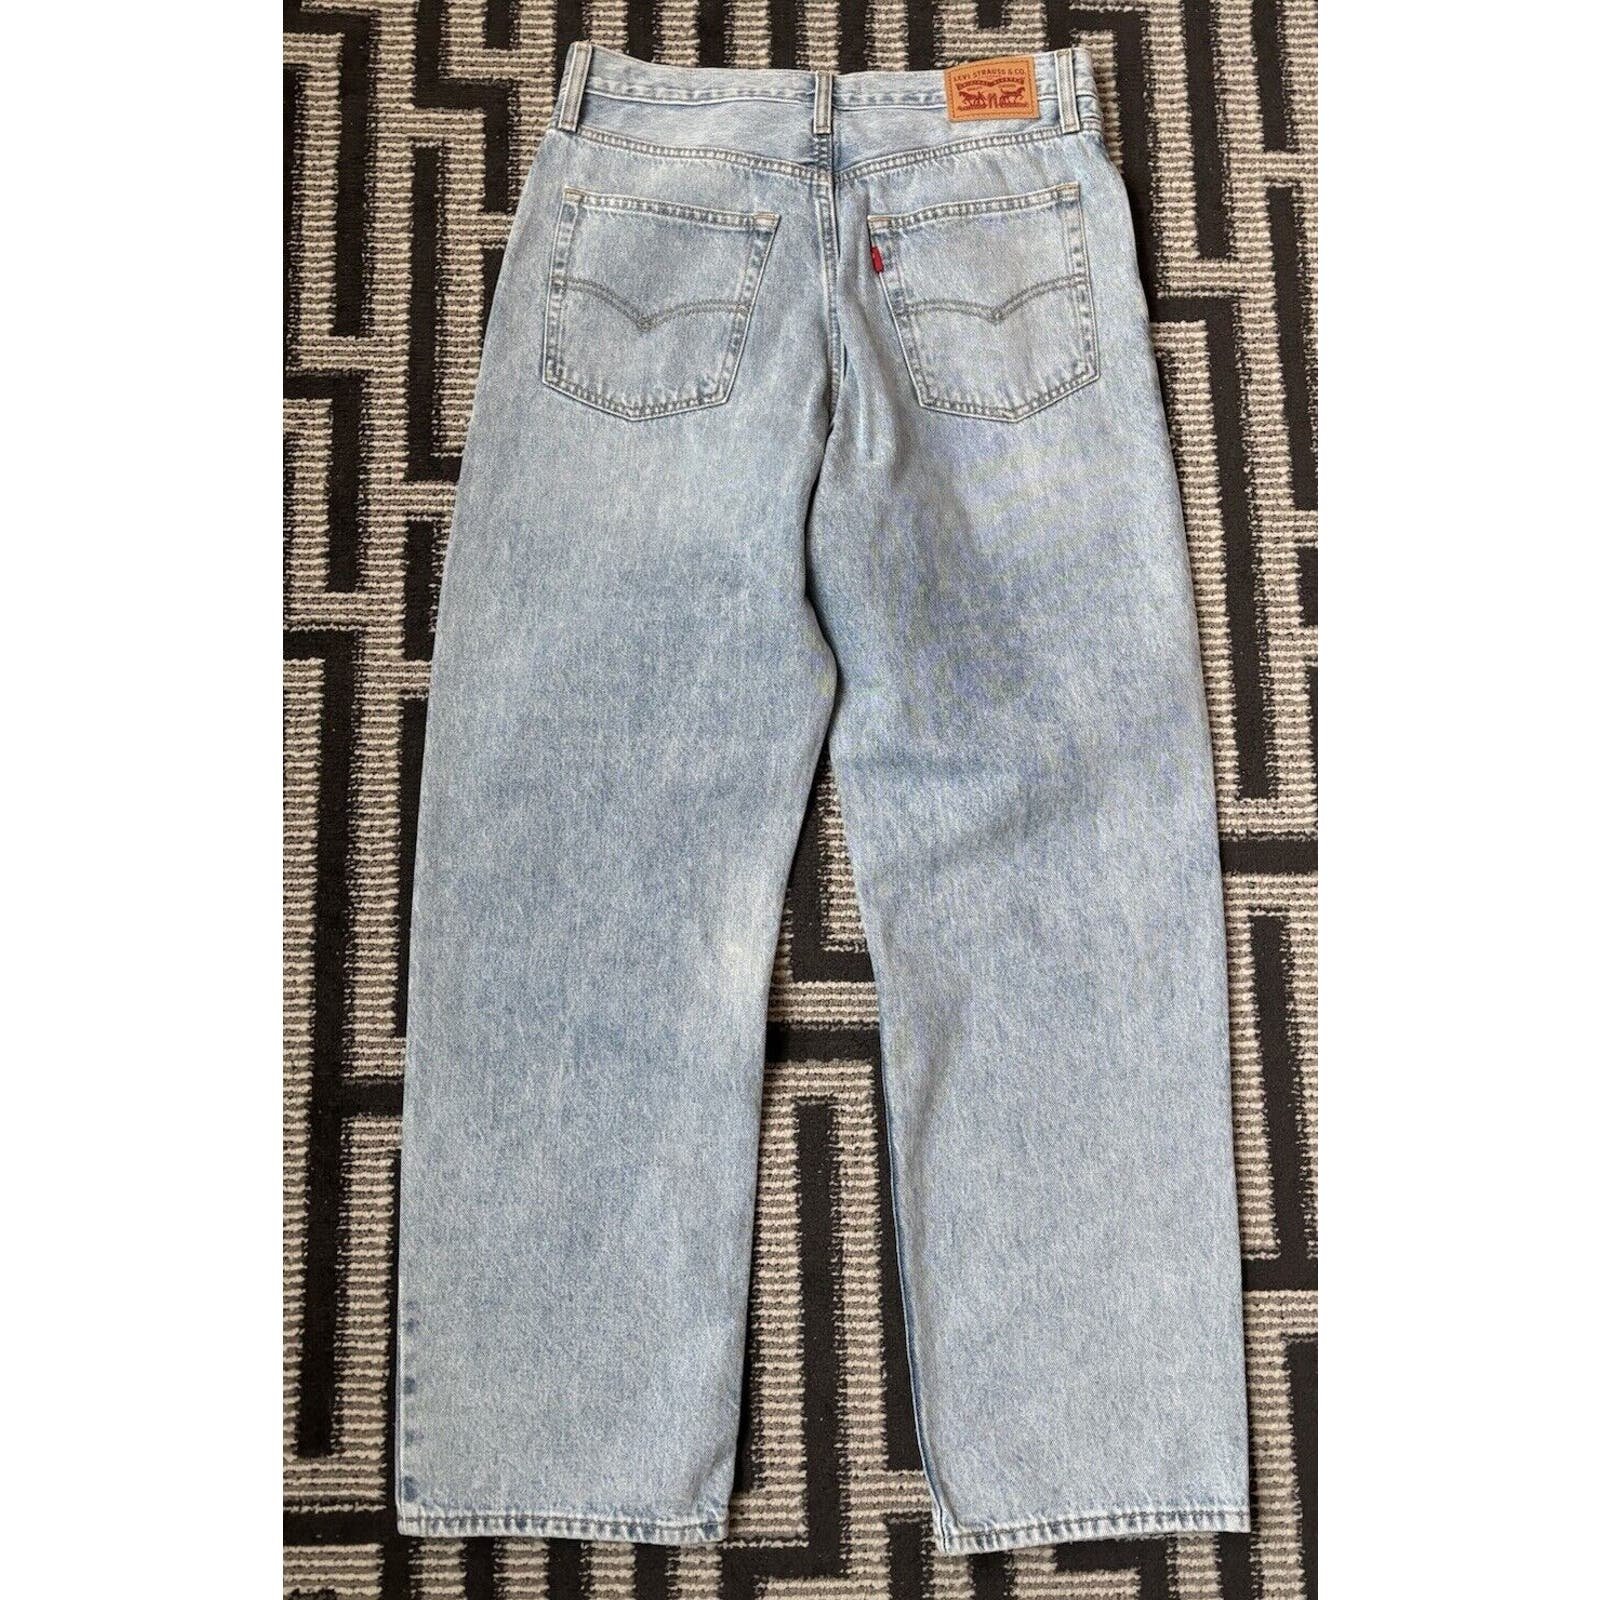 large discount Levi´s Women´s ´94 Baggy Jeans Size 31 New NWT Straight Leg High Rise 31x31 pGplfWPQo US Sale